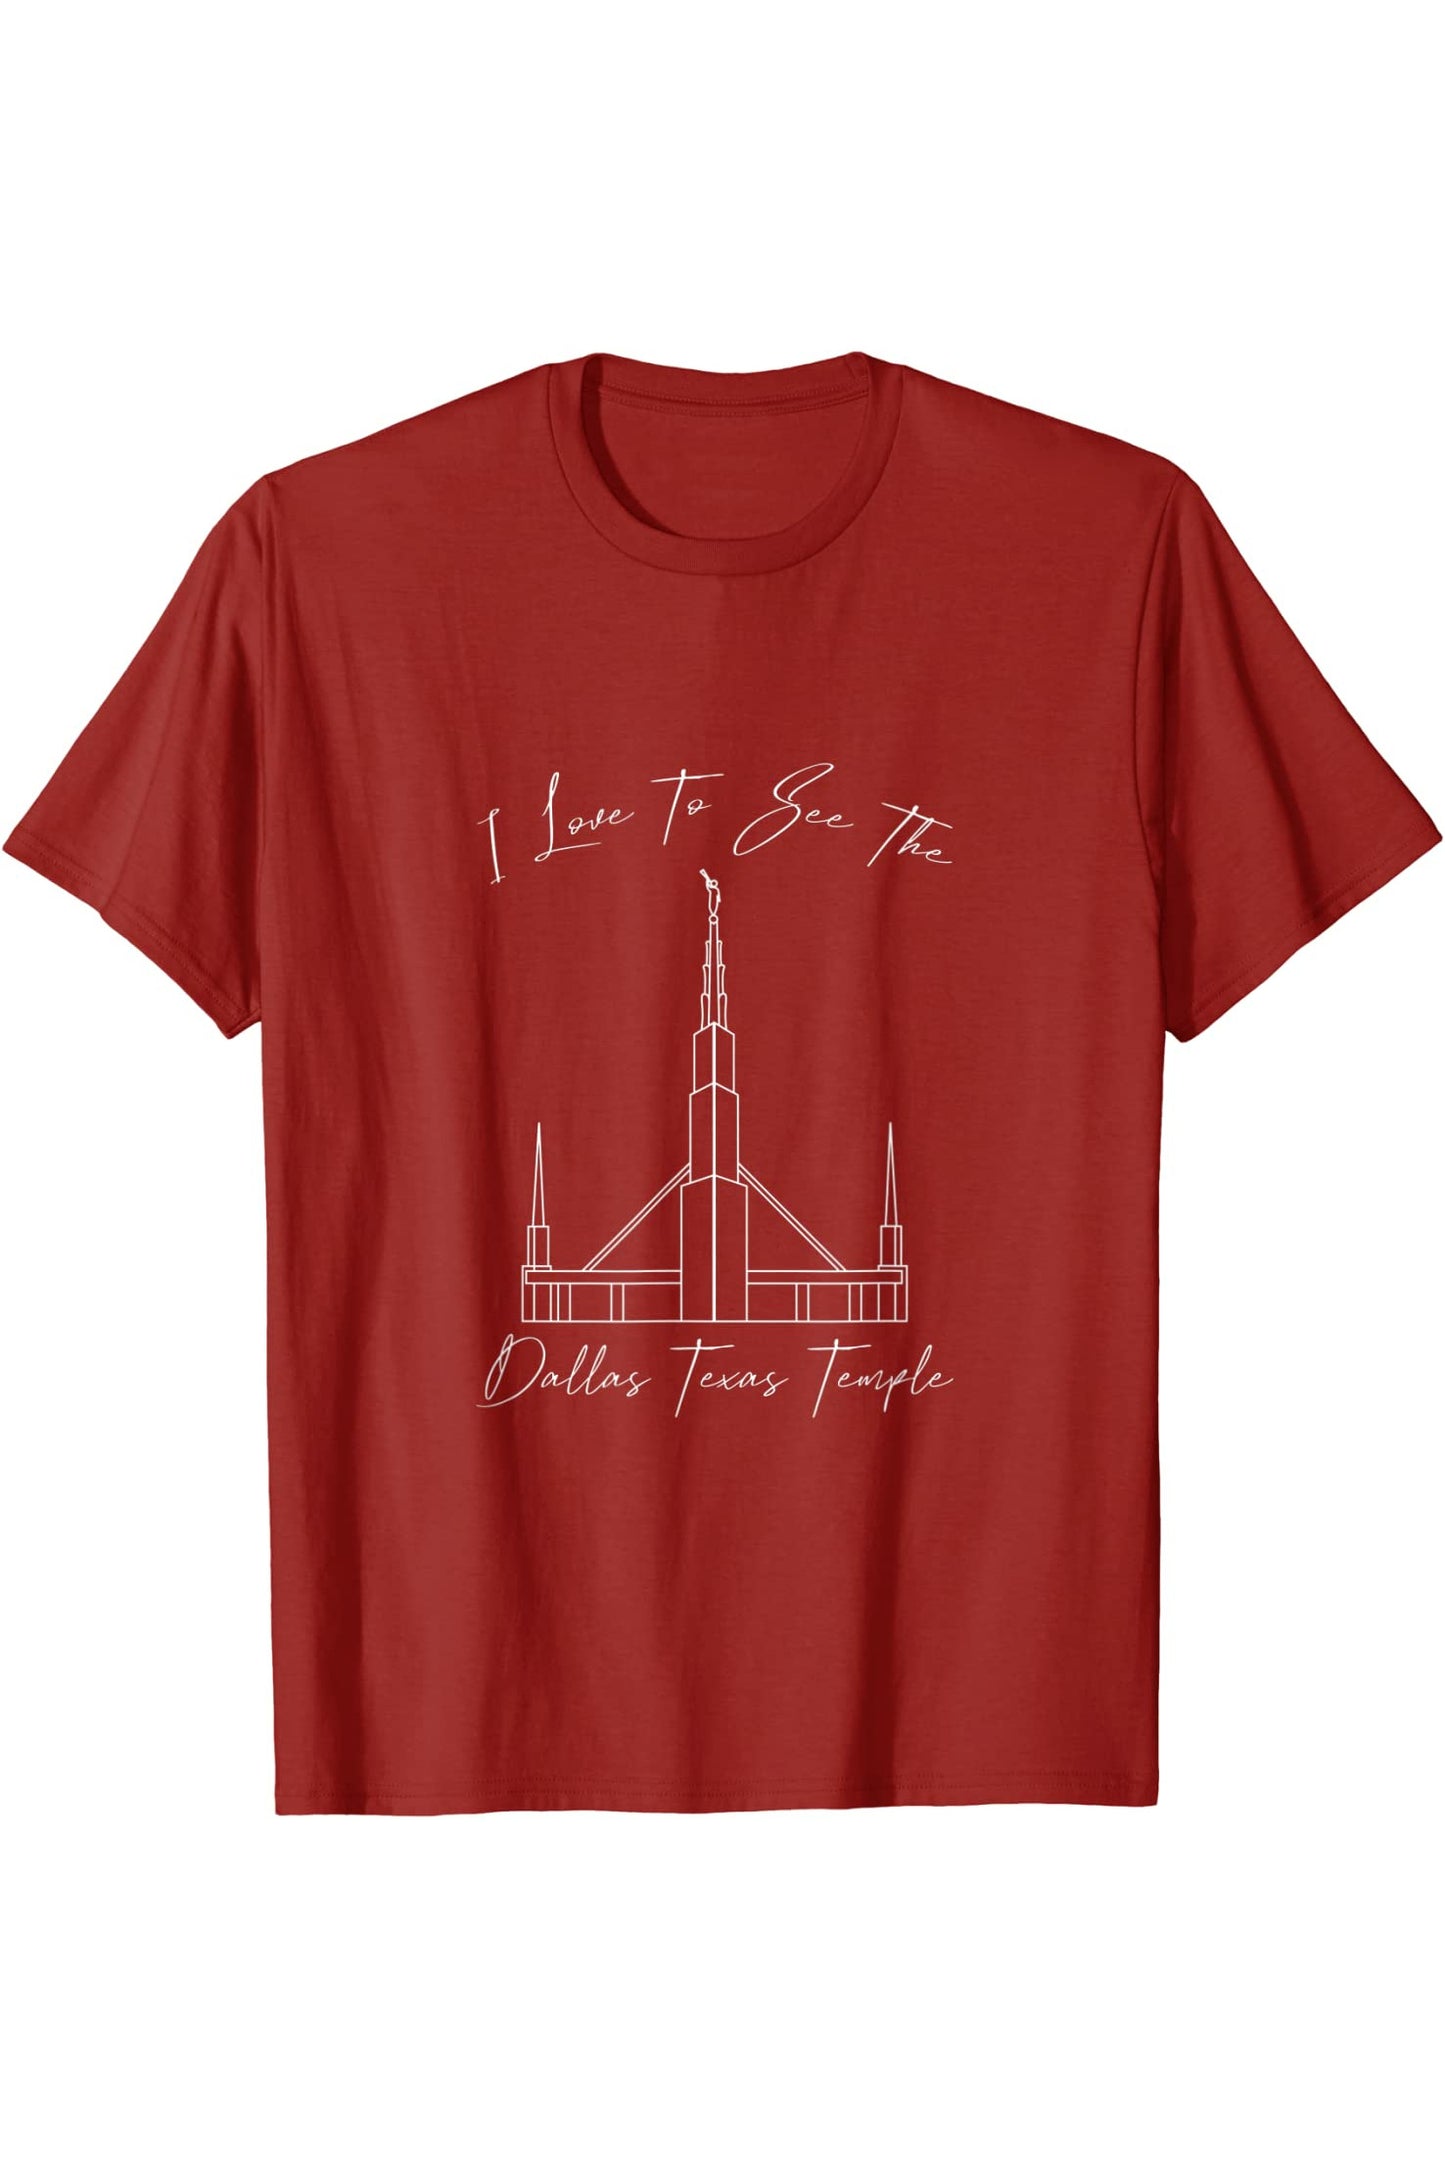 Dallas Texas Temple T-Shirt - Calligraphy Style (English) US